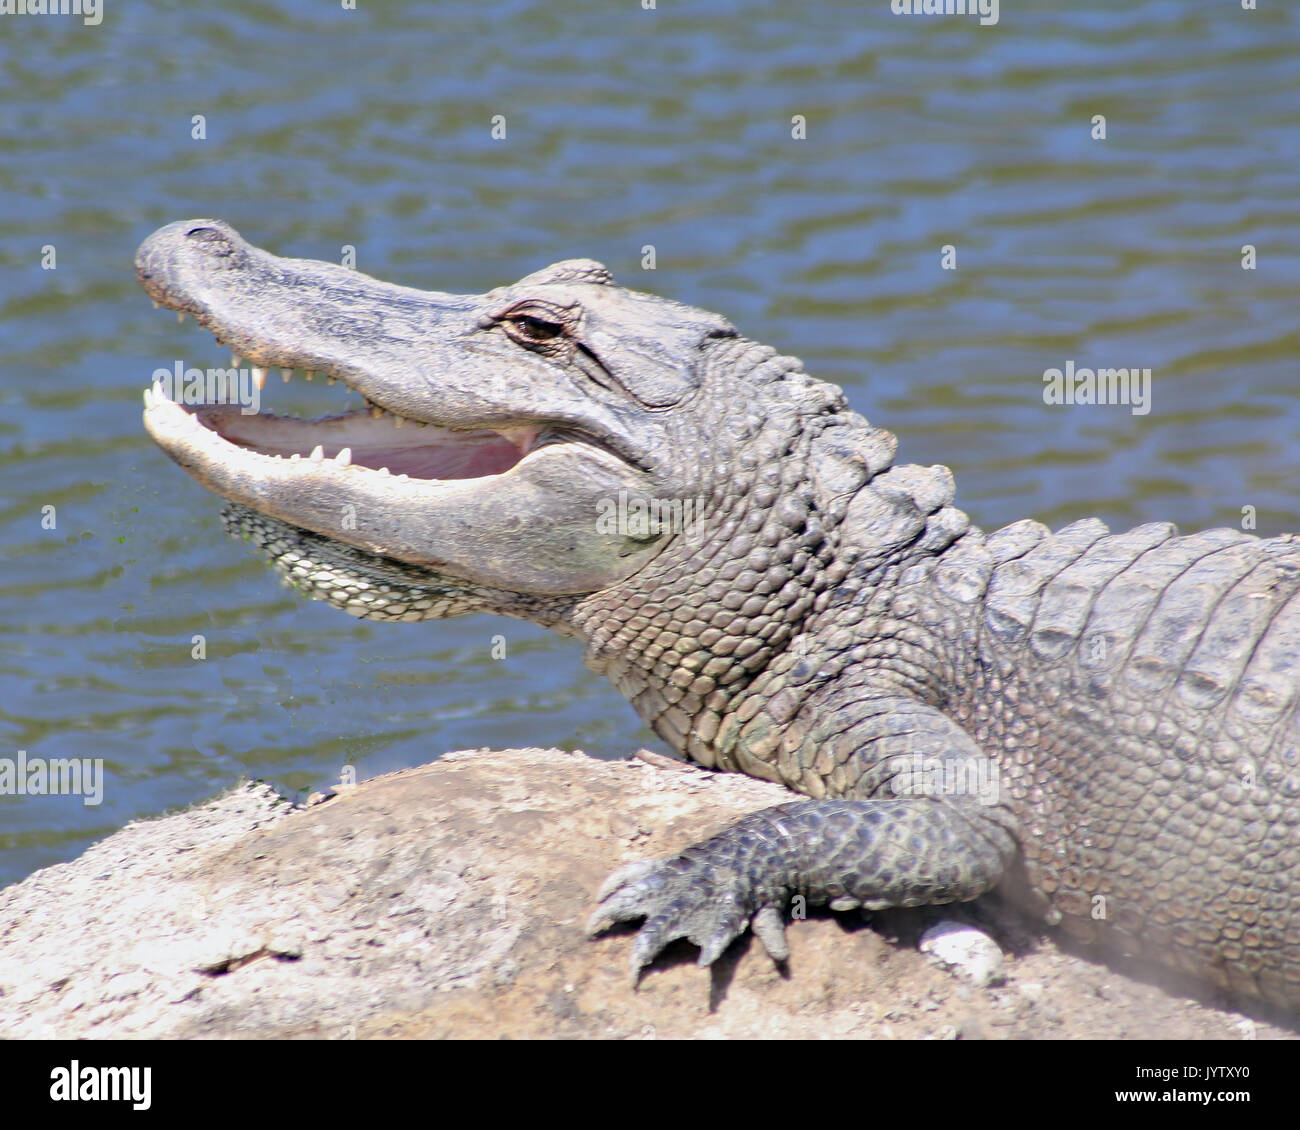 Alligator resting on a rock along a river with mouth open Stock Photo